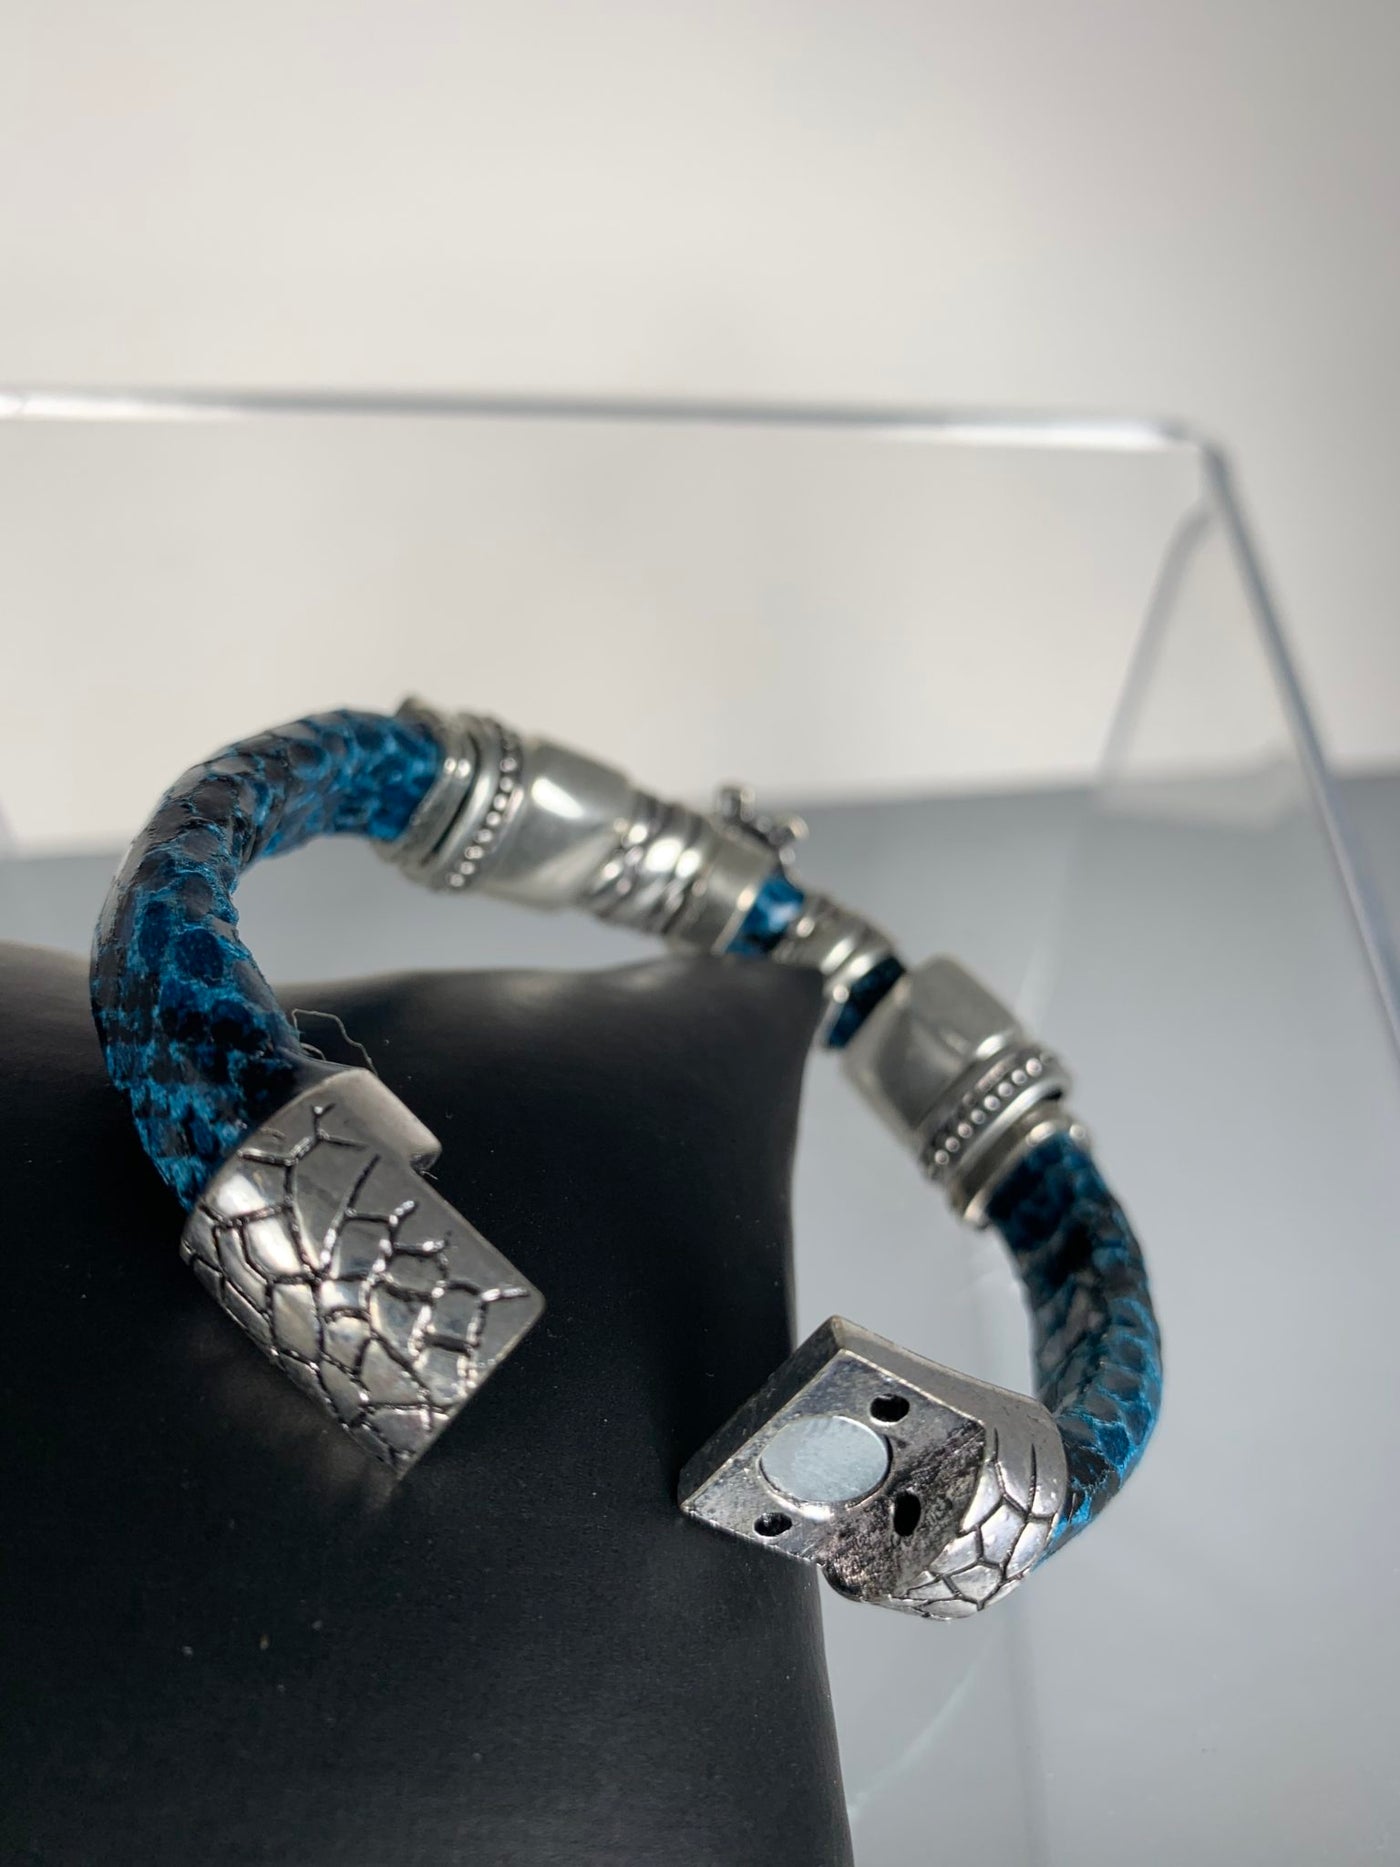 Blue Faux Snake Skin Band Bracelet Featuring a Wise Owl